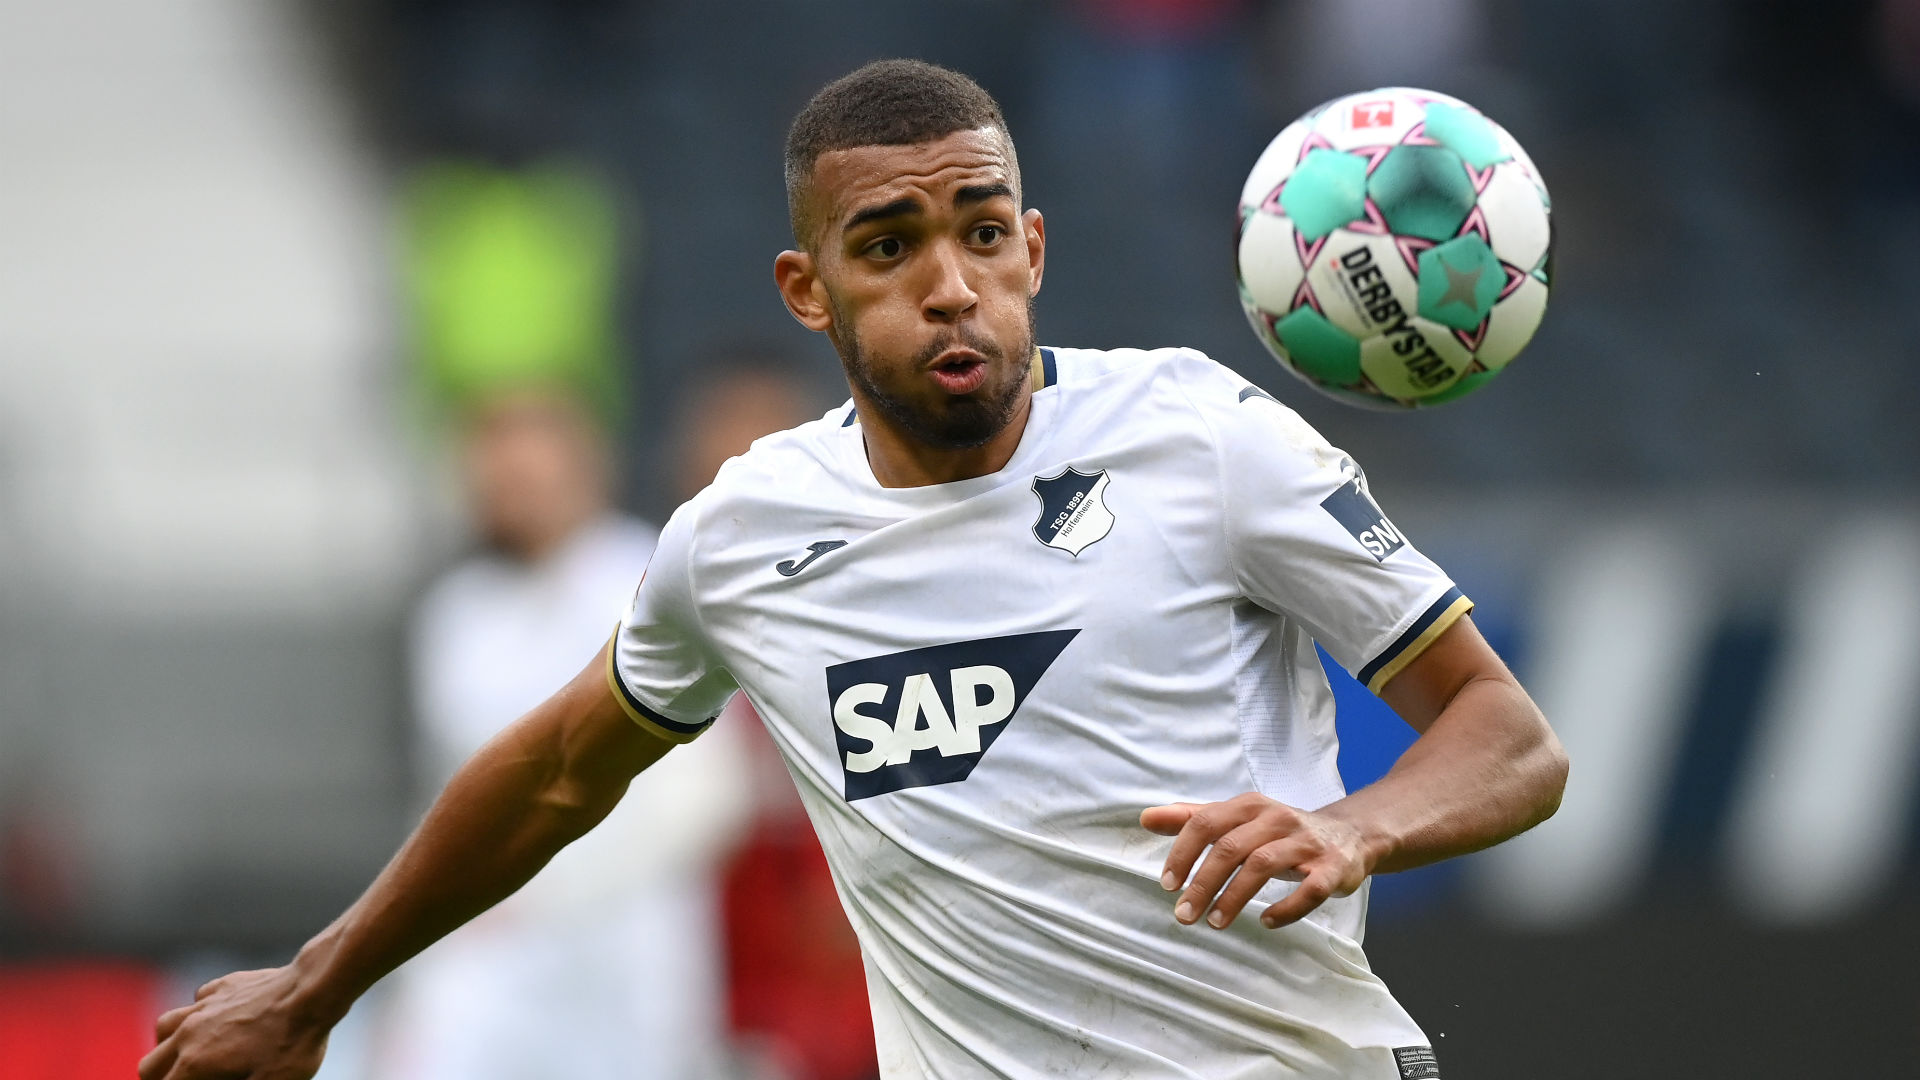 Hoffenheim’s Akpoguma set for spell on sidelines after muscle injury